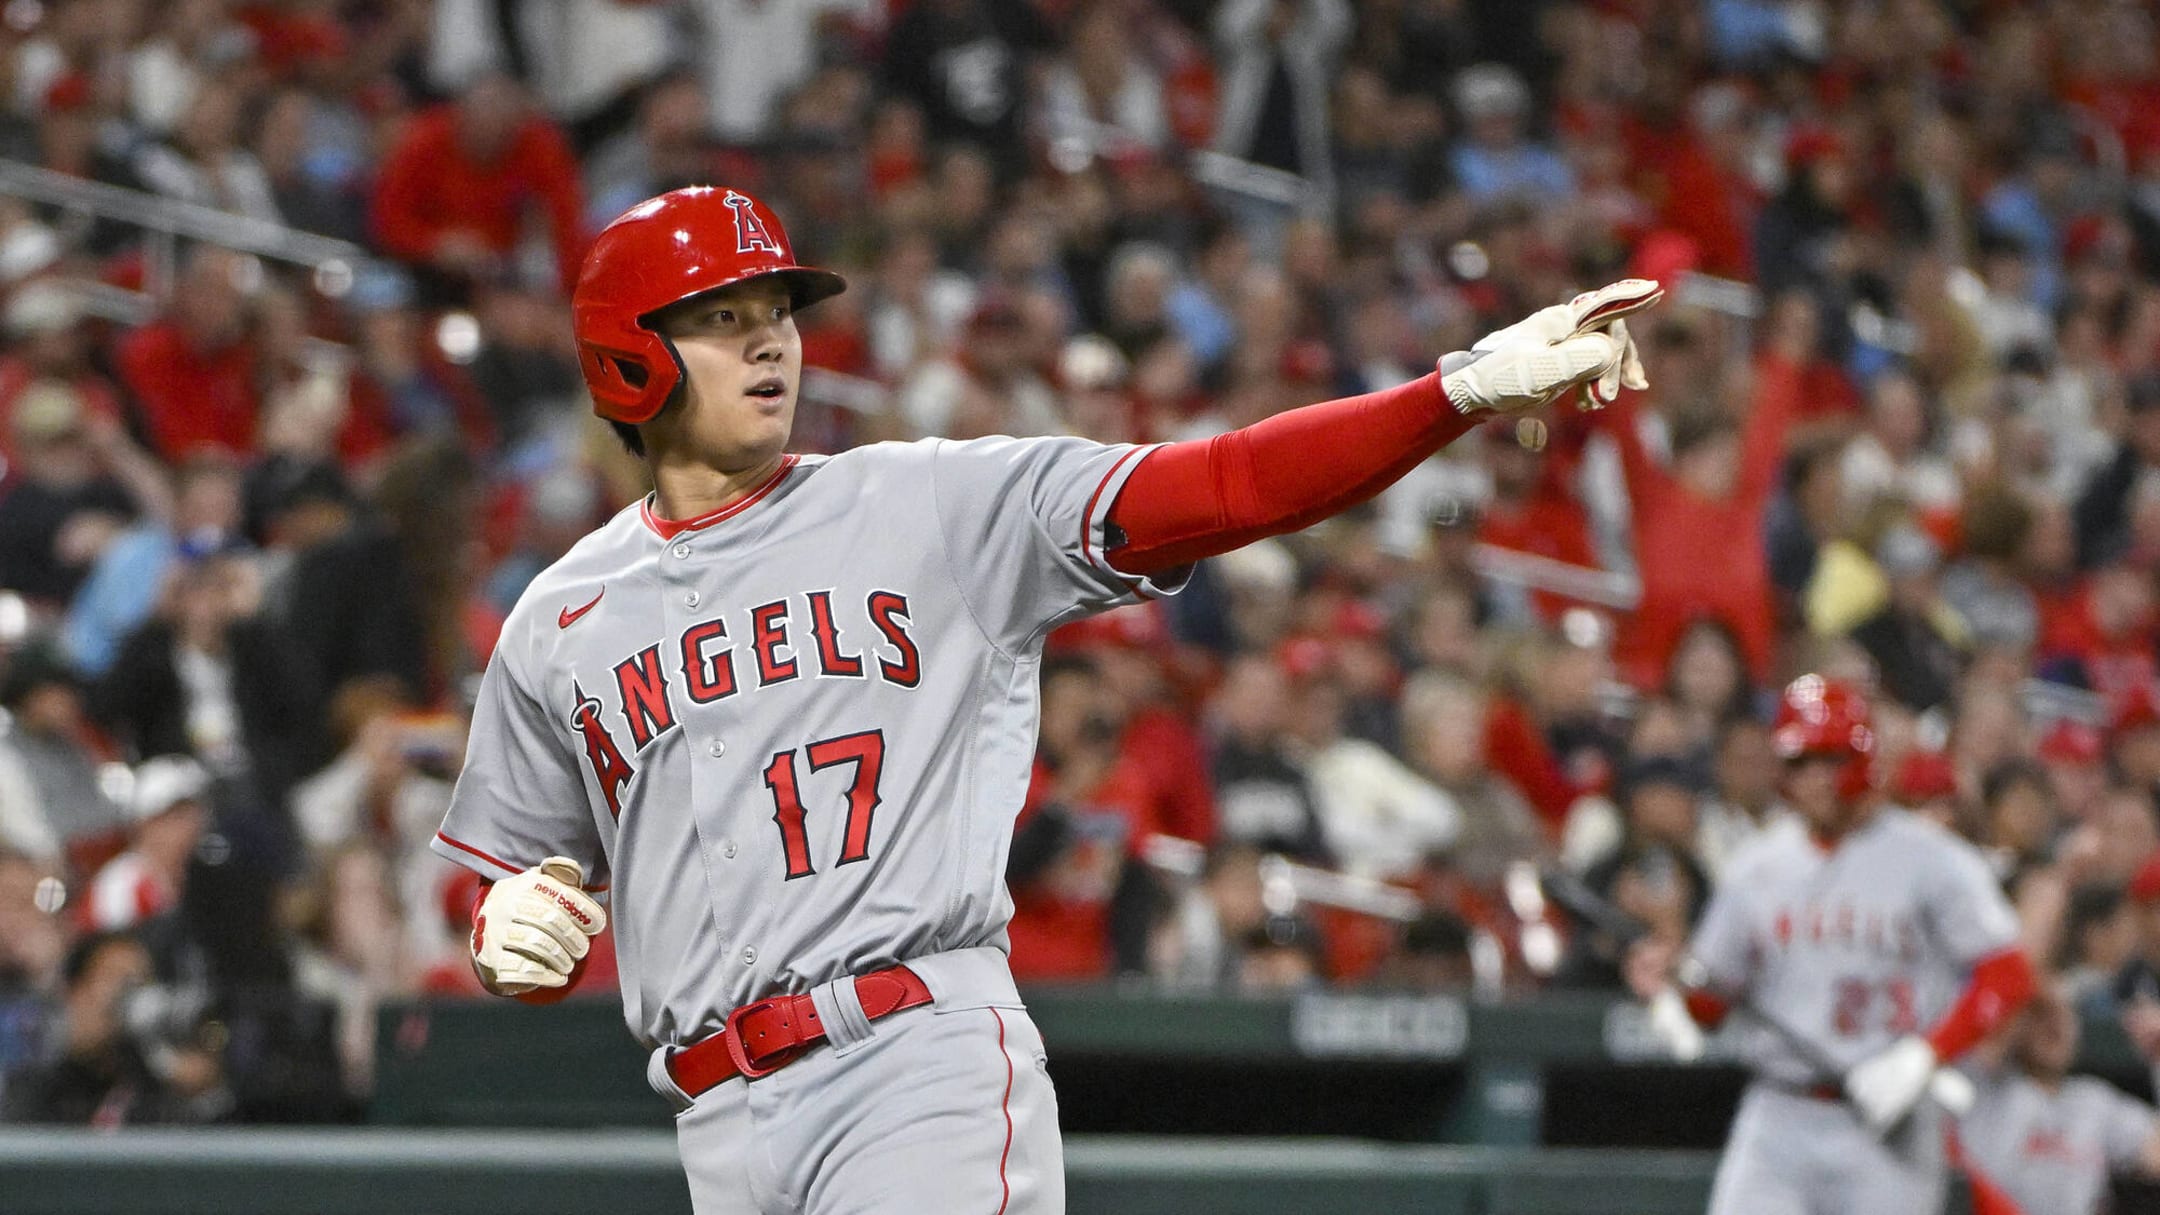 Who is the best player in baseball besides Shohei Ohtani - The